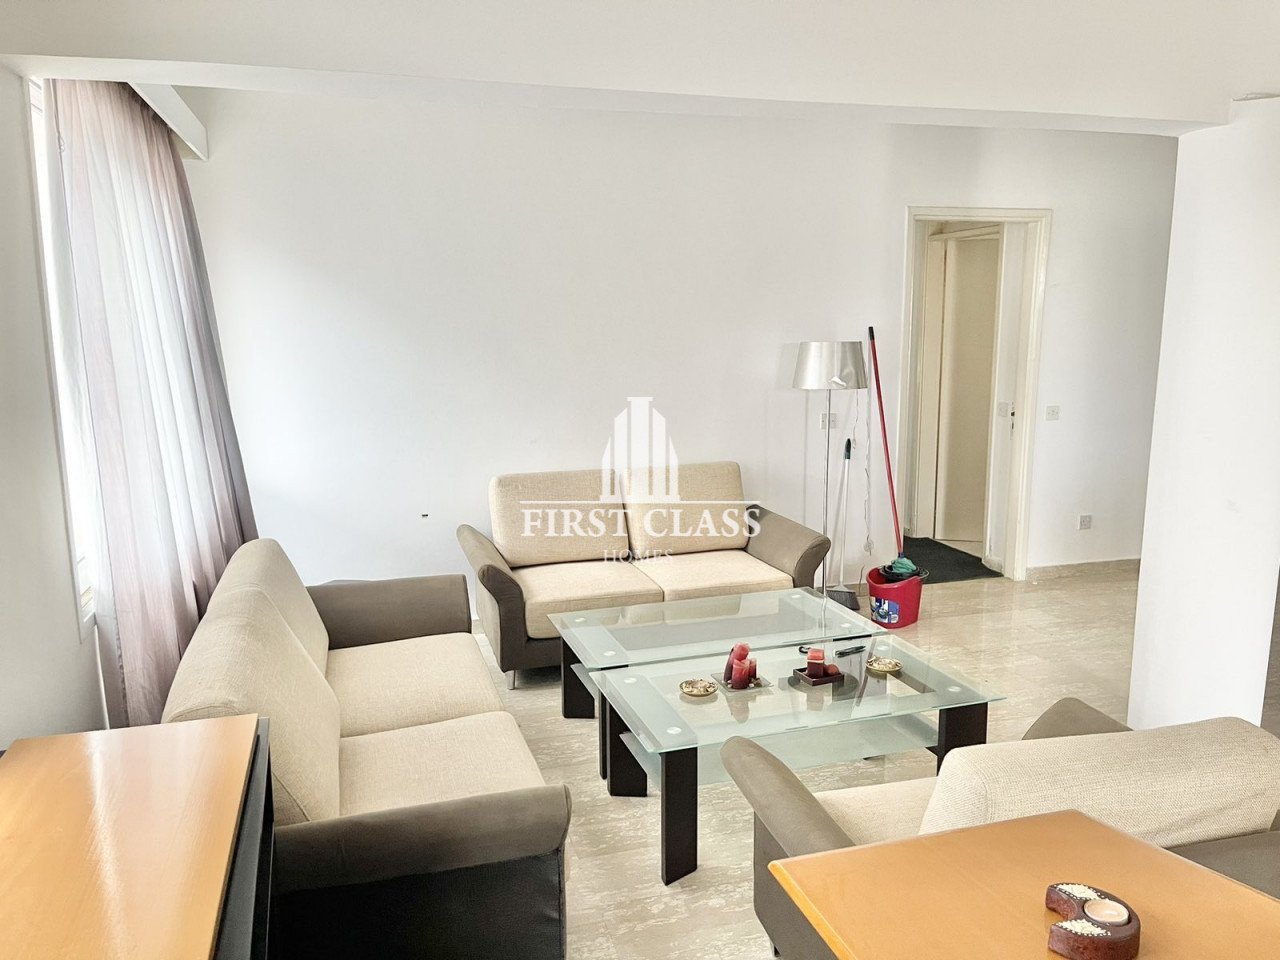 Property for Rent: Apartment (Penthouse) in Agios Andreas, Nicosia for Rent | Key Realtor Cyprus